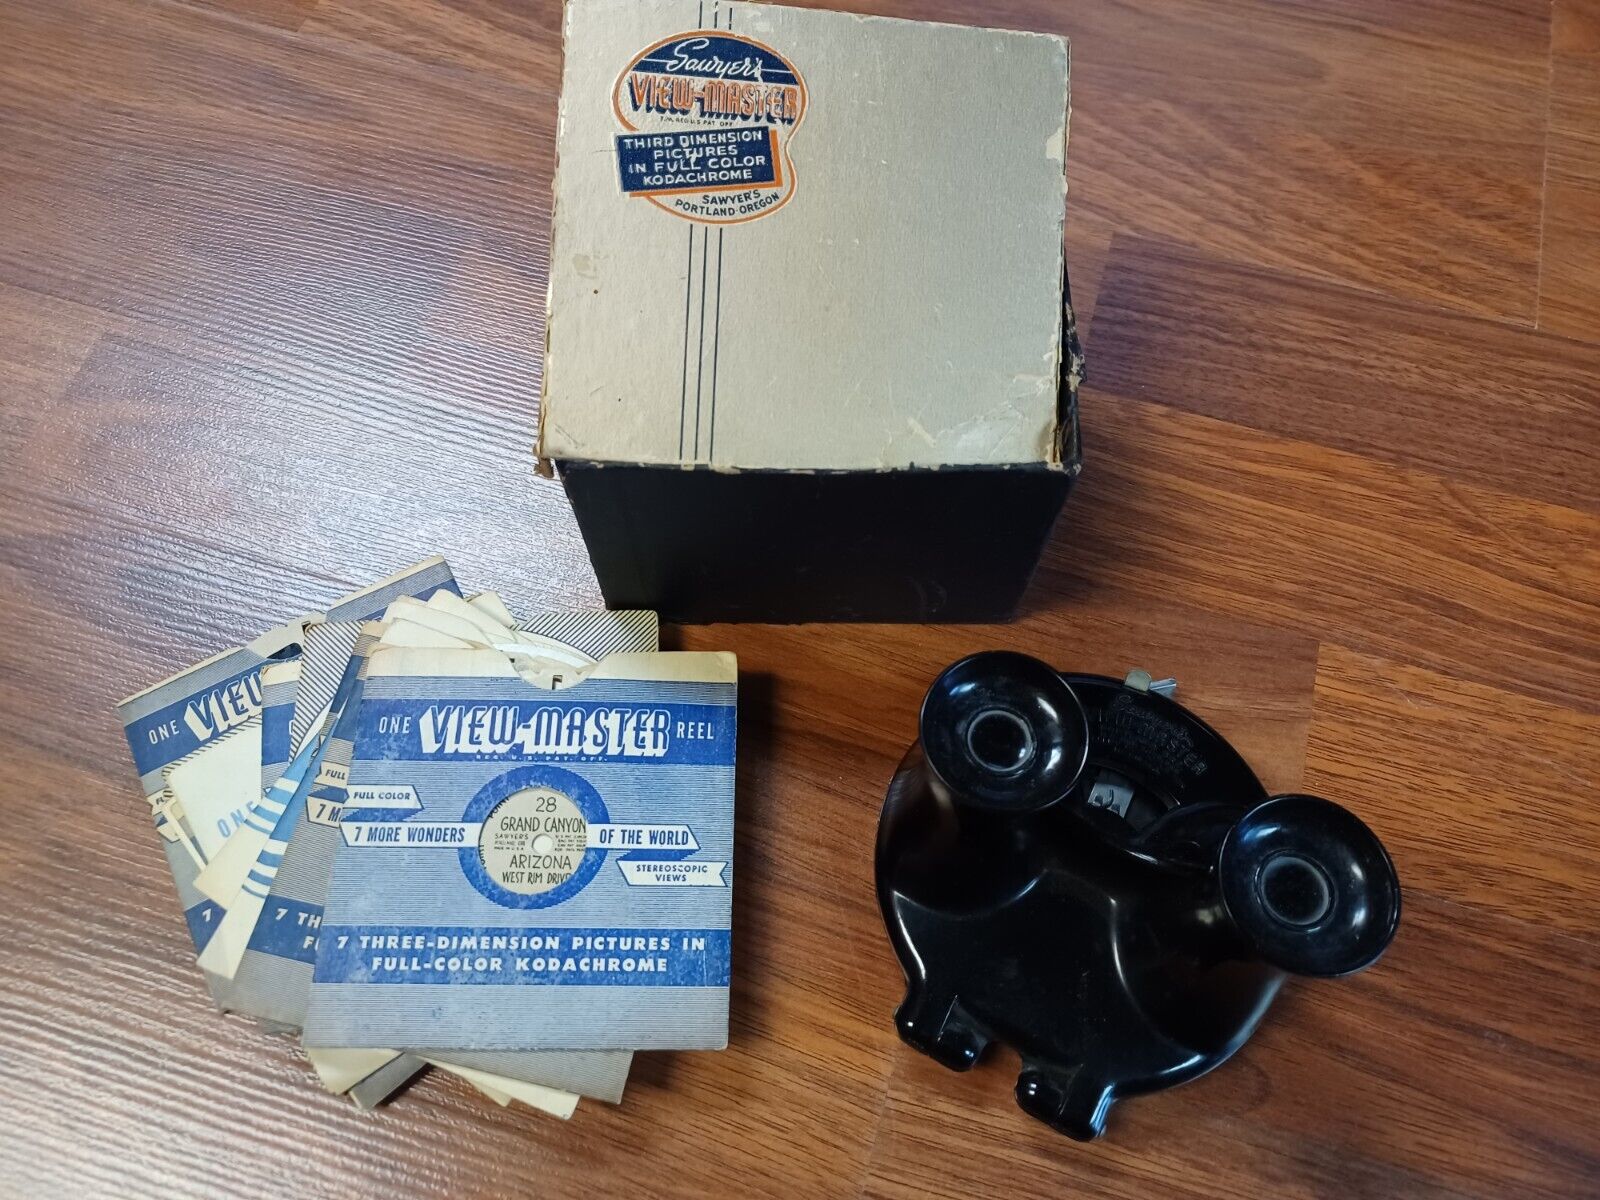 Sawyer\'s View-Master Model B and 16 Reels - Works